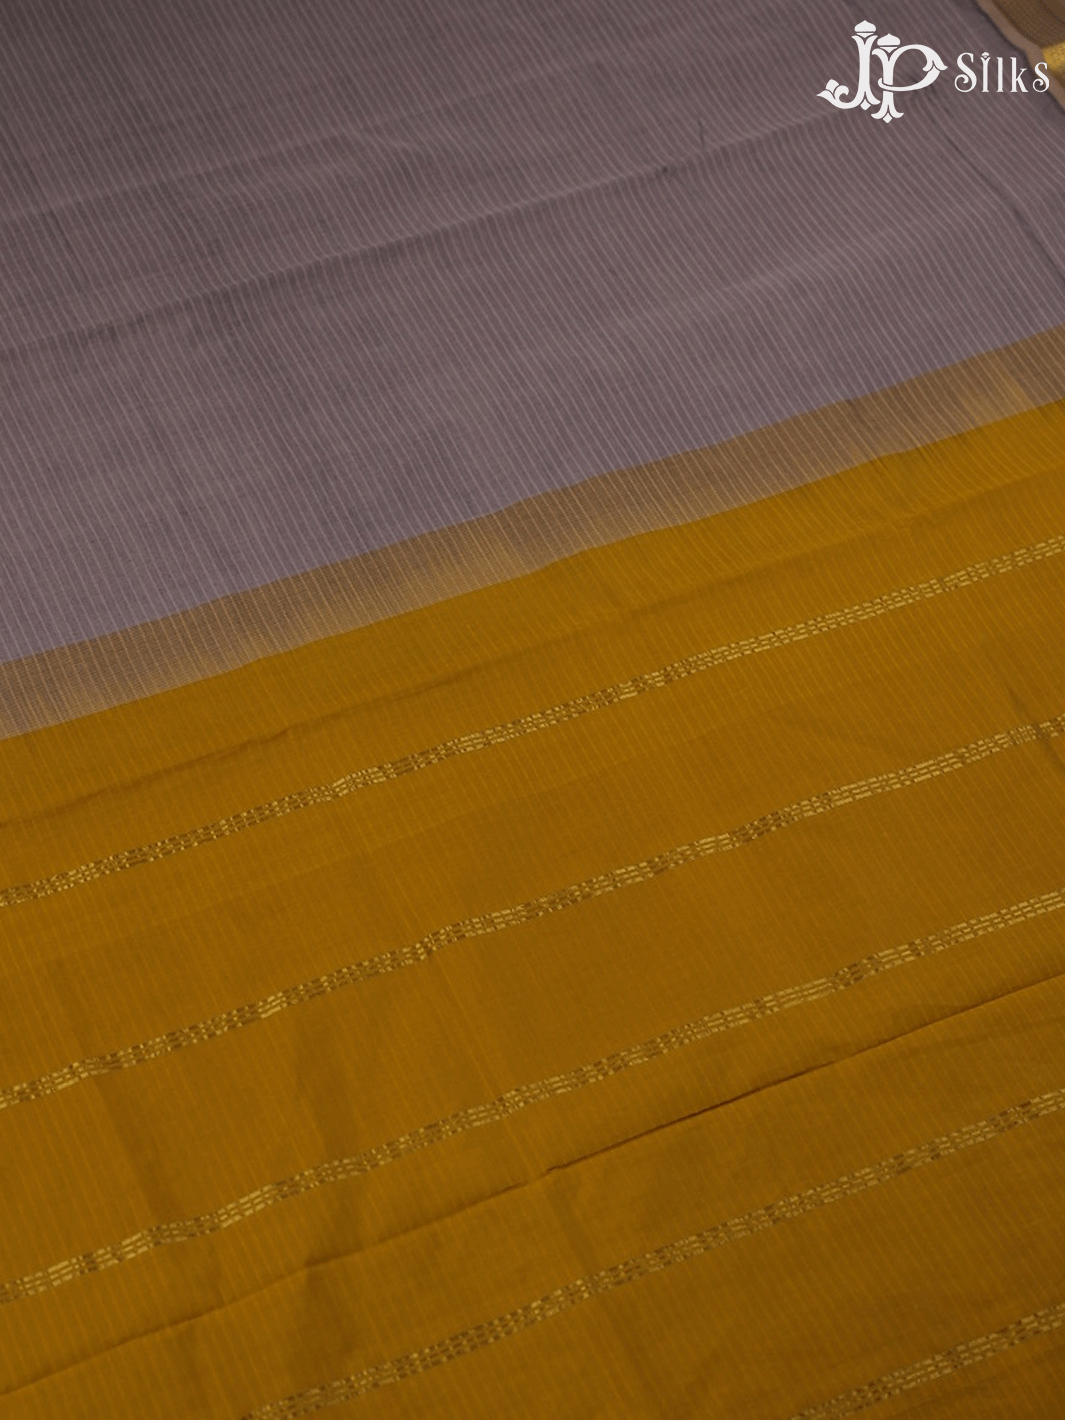 Grey and Yellow Poly Cotton Saree - F303 - View 4